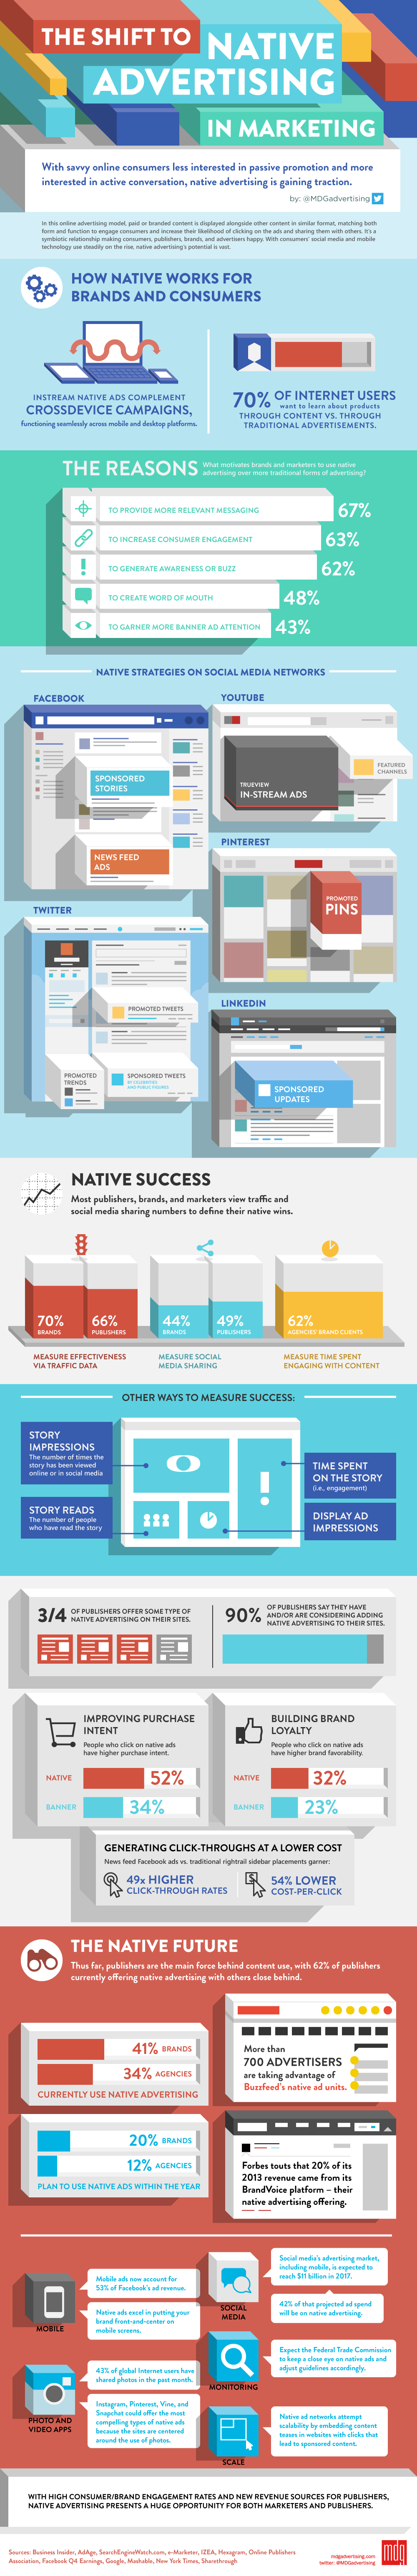 The Shift to Native Advertising in Marketing